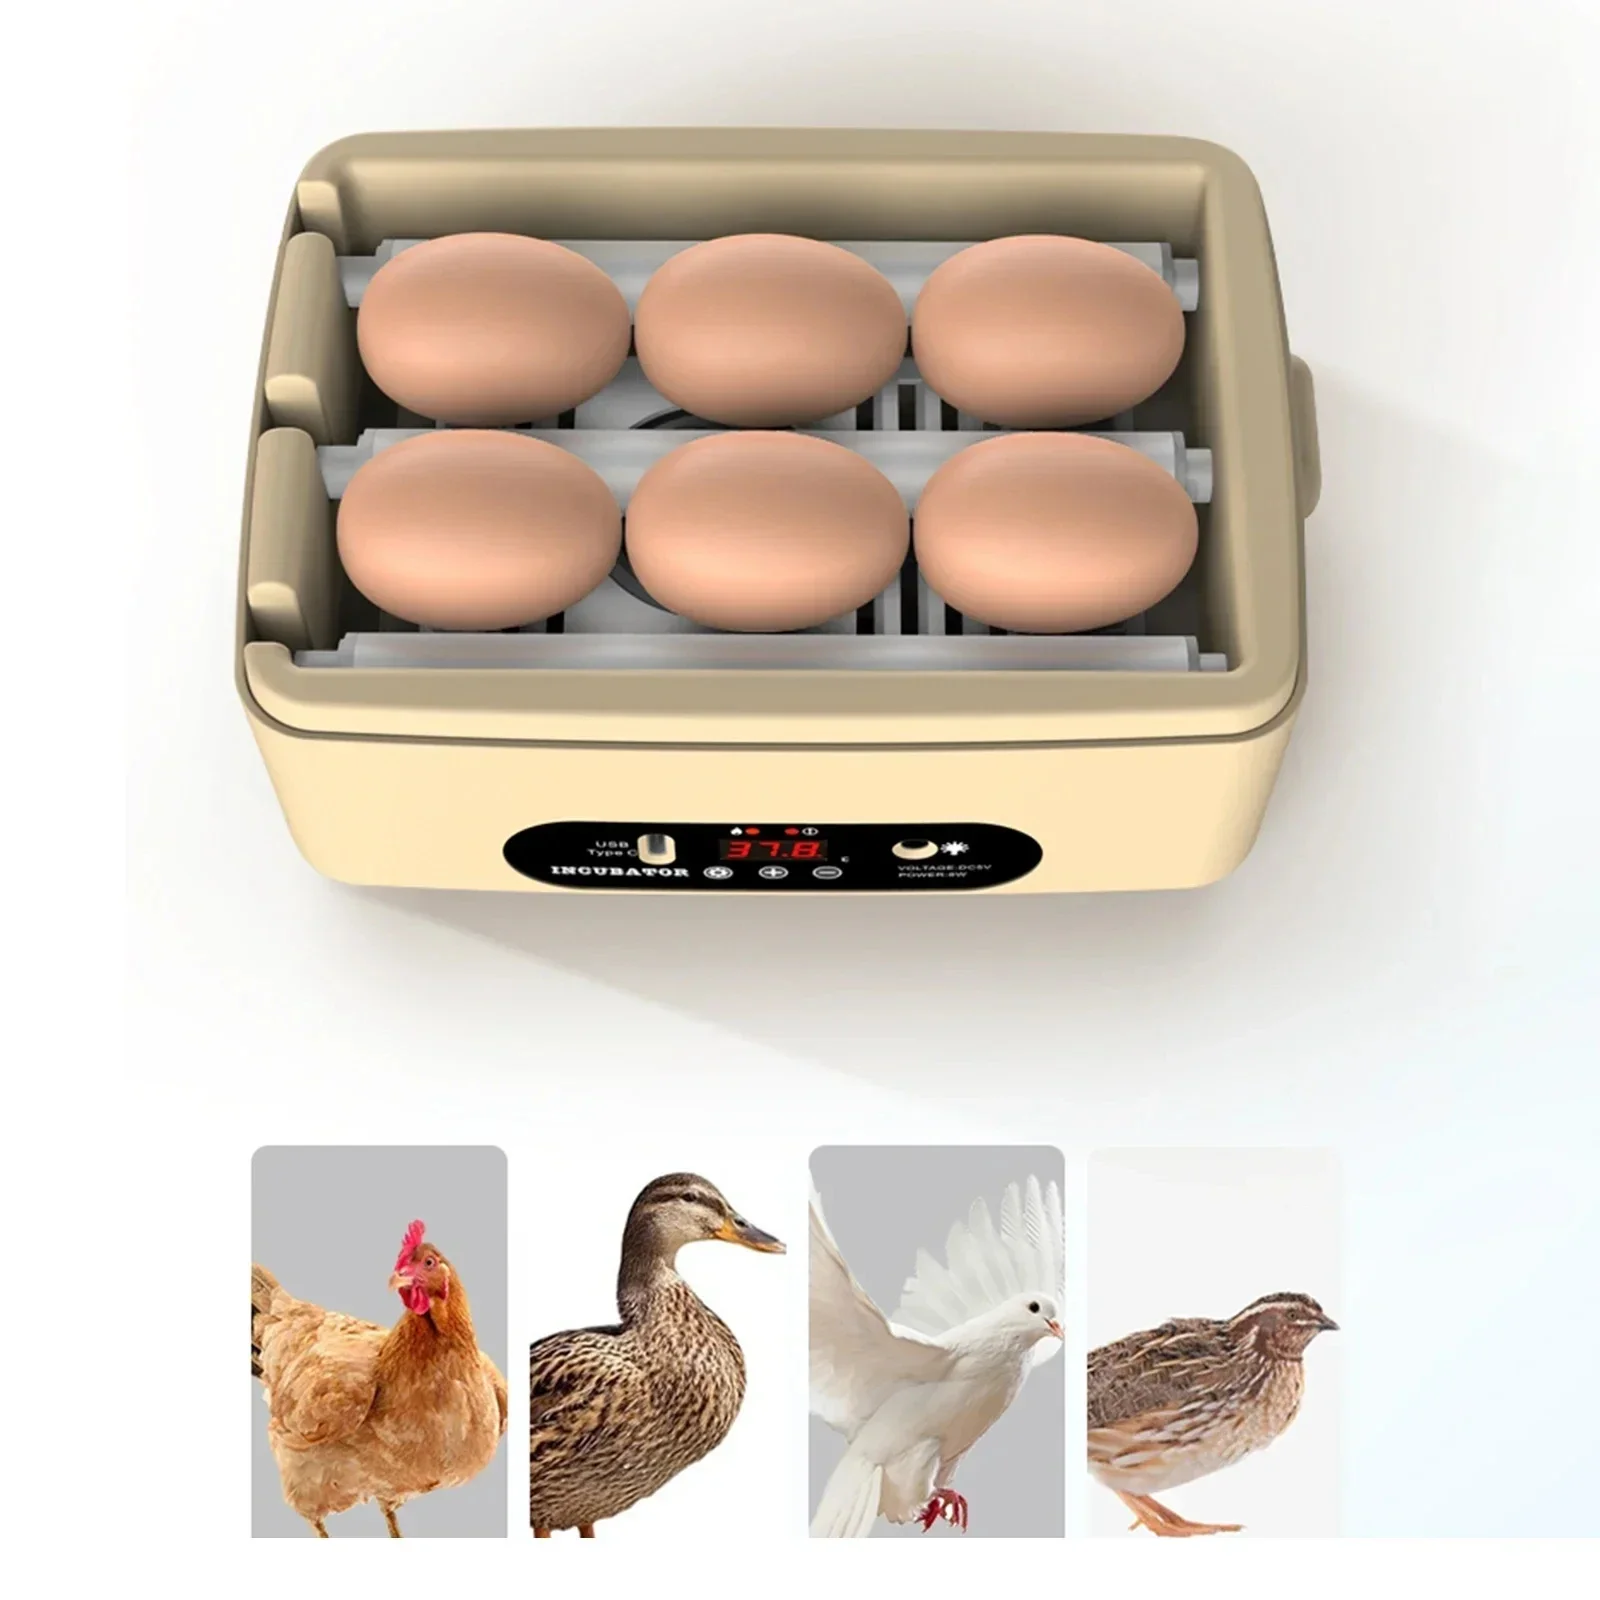 

6 Eggs Automatic Egg Incubator Poultry Hatching Machine Mini Turning Temperature Control Breeder for Chicken Birds Duck Goose